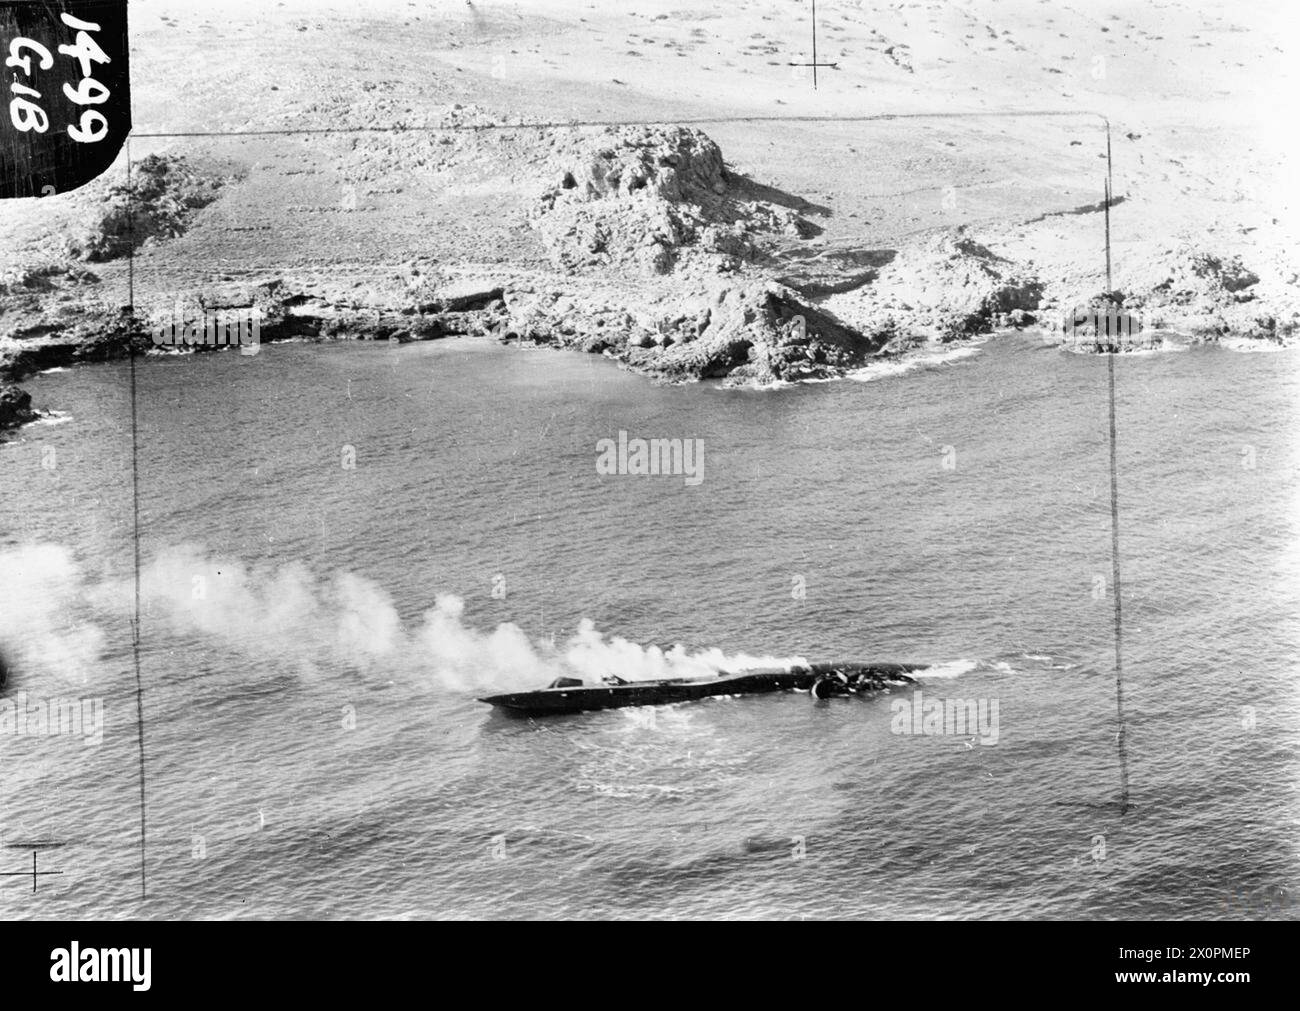 ROYAL AIR FORCE OPERATIONS IN MALTA, GIBRALTAR AND THE MEDITERRANEAN, 1940-1945. - German submarineType VIIC, U-617, on fire and lying on her port side after being beached off the Moroccan coast near Melilla, as a result of damage sustained in an attack by two Gibraltar-based Vickers Wellington Mark VIIIs of No. 179 Squadron RAF, in the early morning of 12 September 1943. Photograph taken from a Lockheed Hudson of No. 48 Squadron RAF, one of a number of aircraft subsequently despatched from Gibraltar to continue the attack. All of U-617's crew reached shore safely, and she was eventually destr Stock Photo